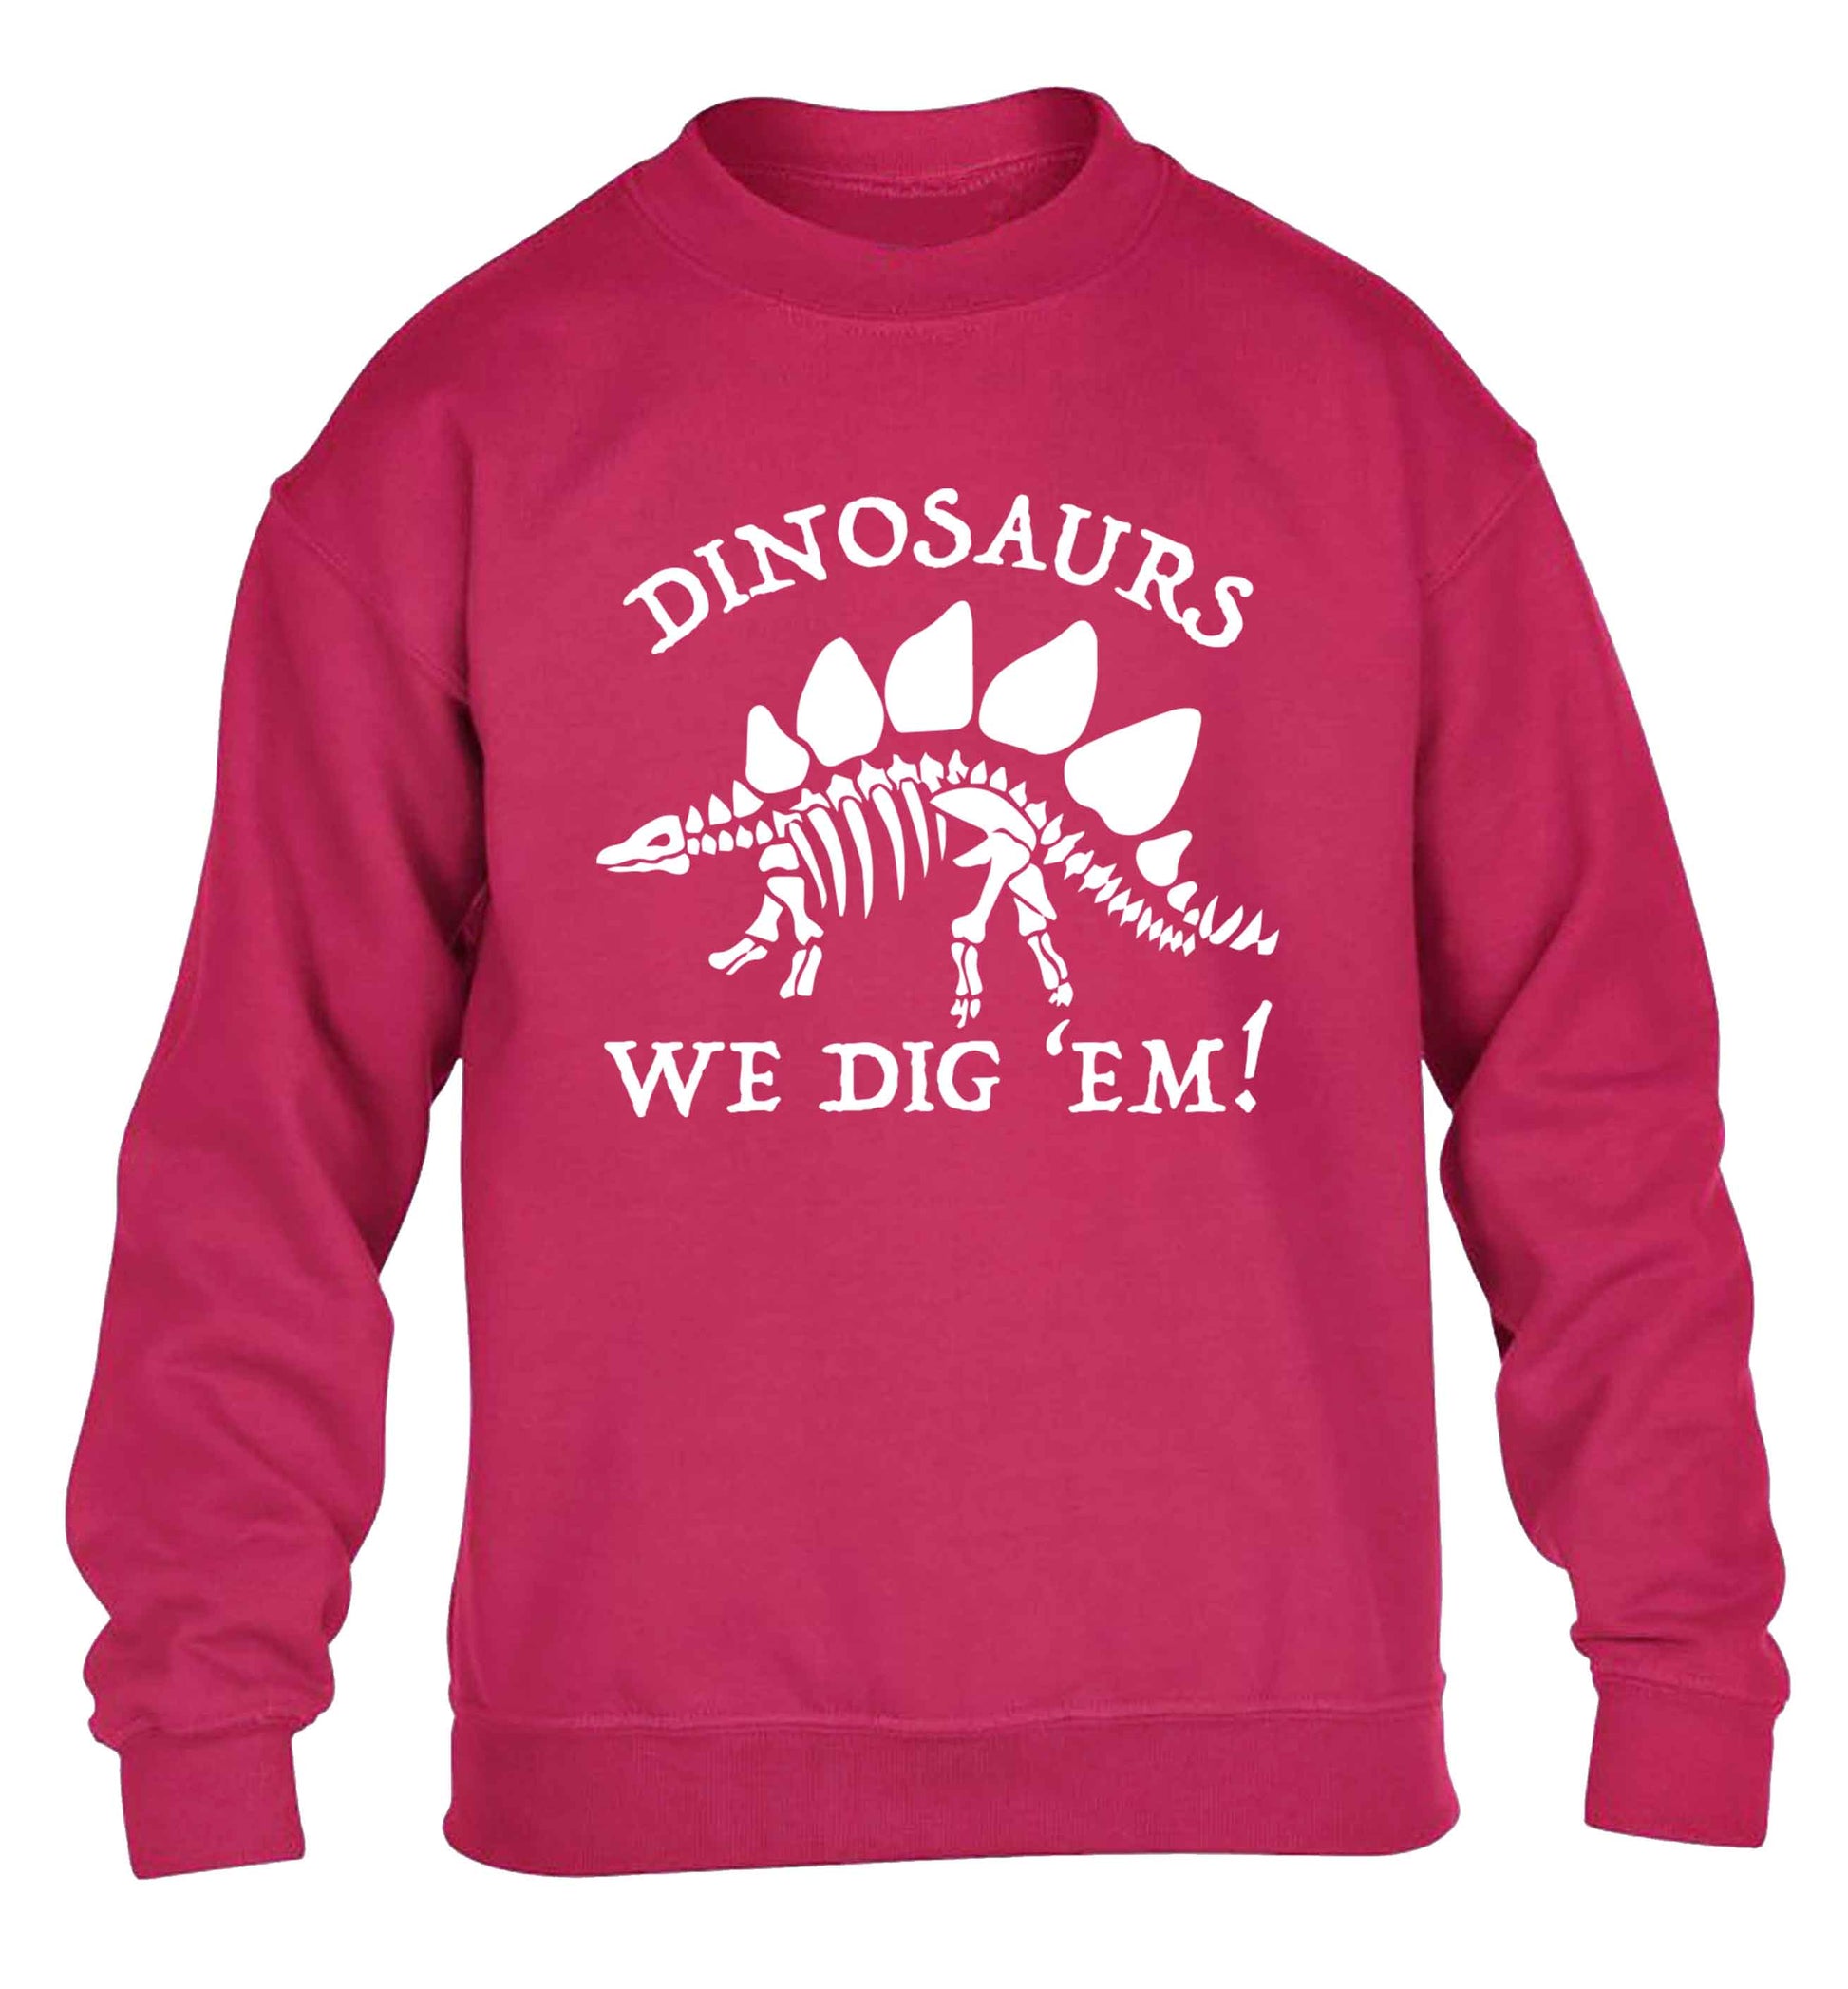 Dinosaurs we dig 'em! children's pink sweater 12-13 Years